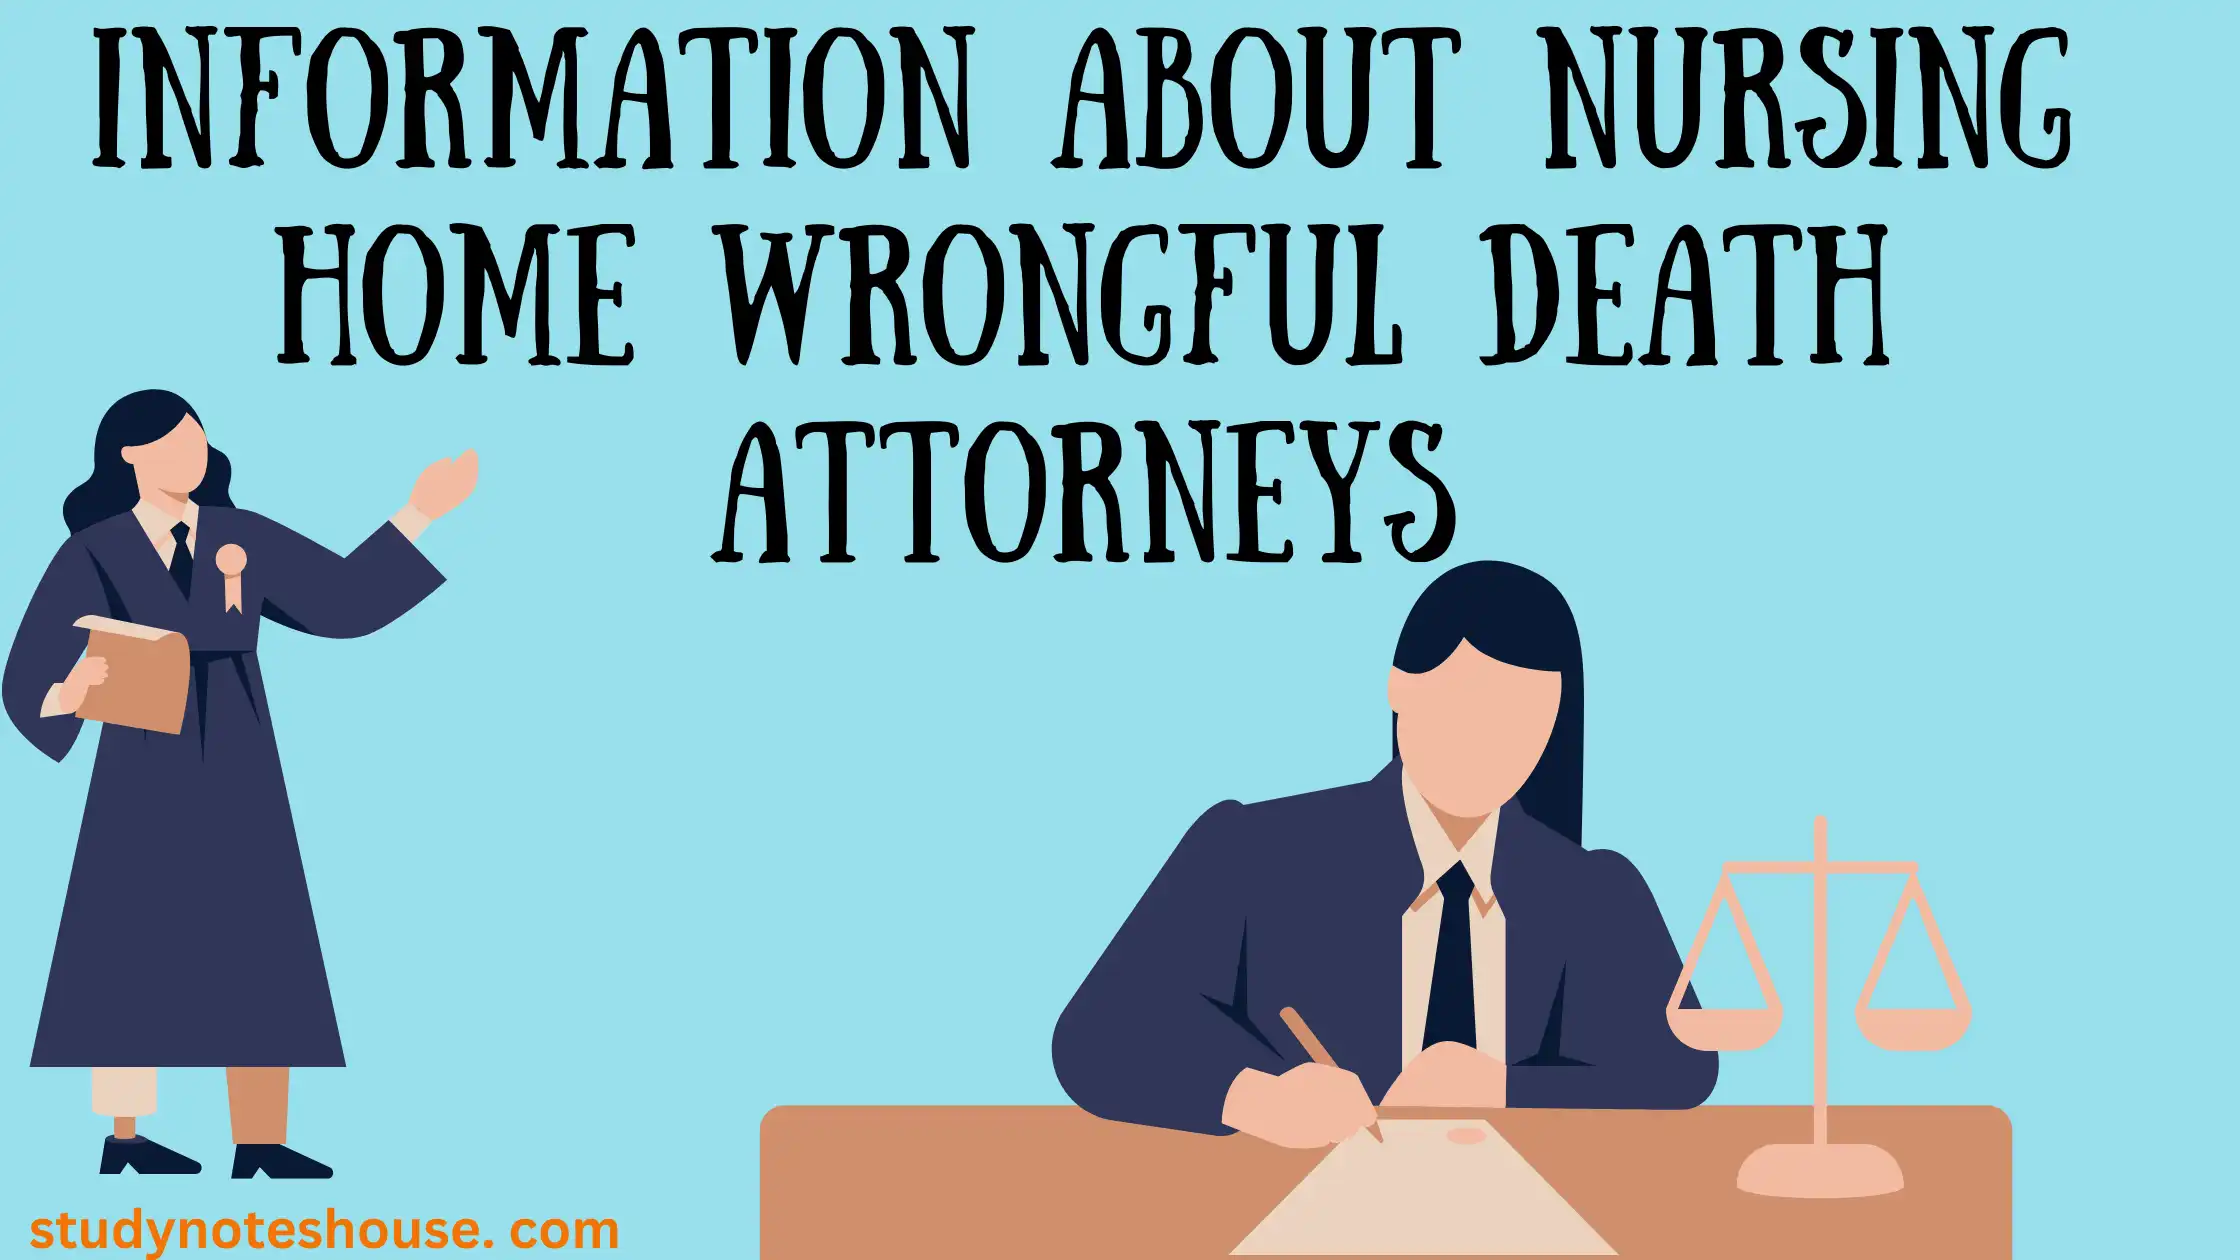 Information about nursing home wrongful death attorneys